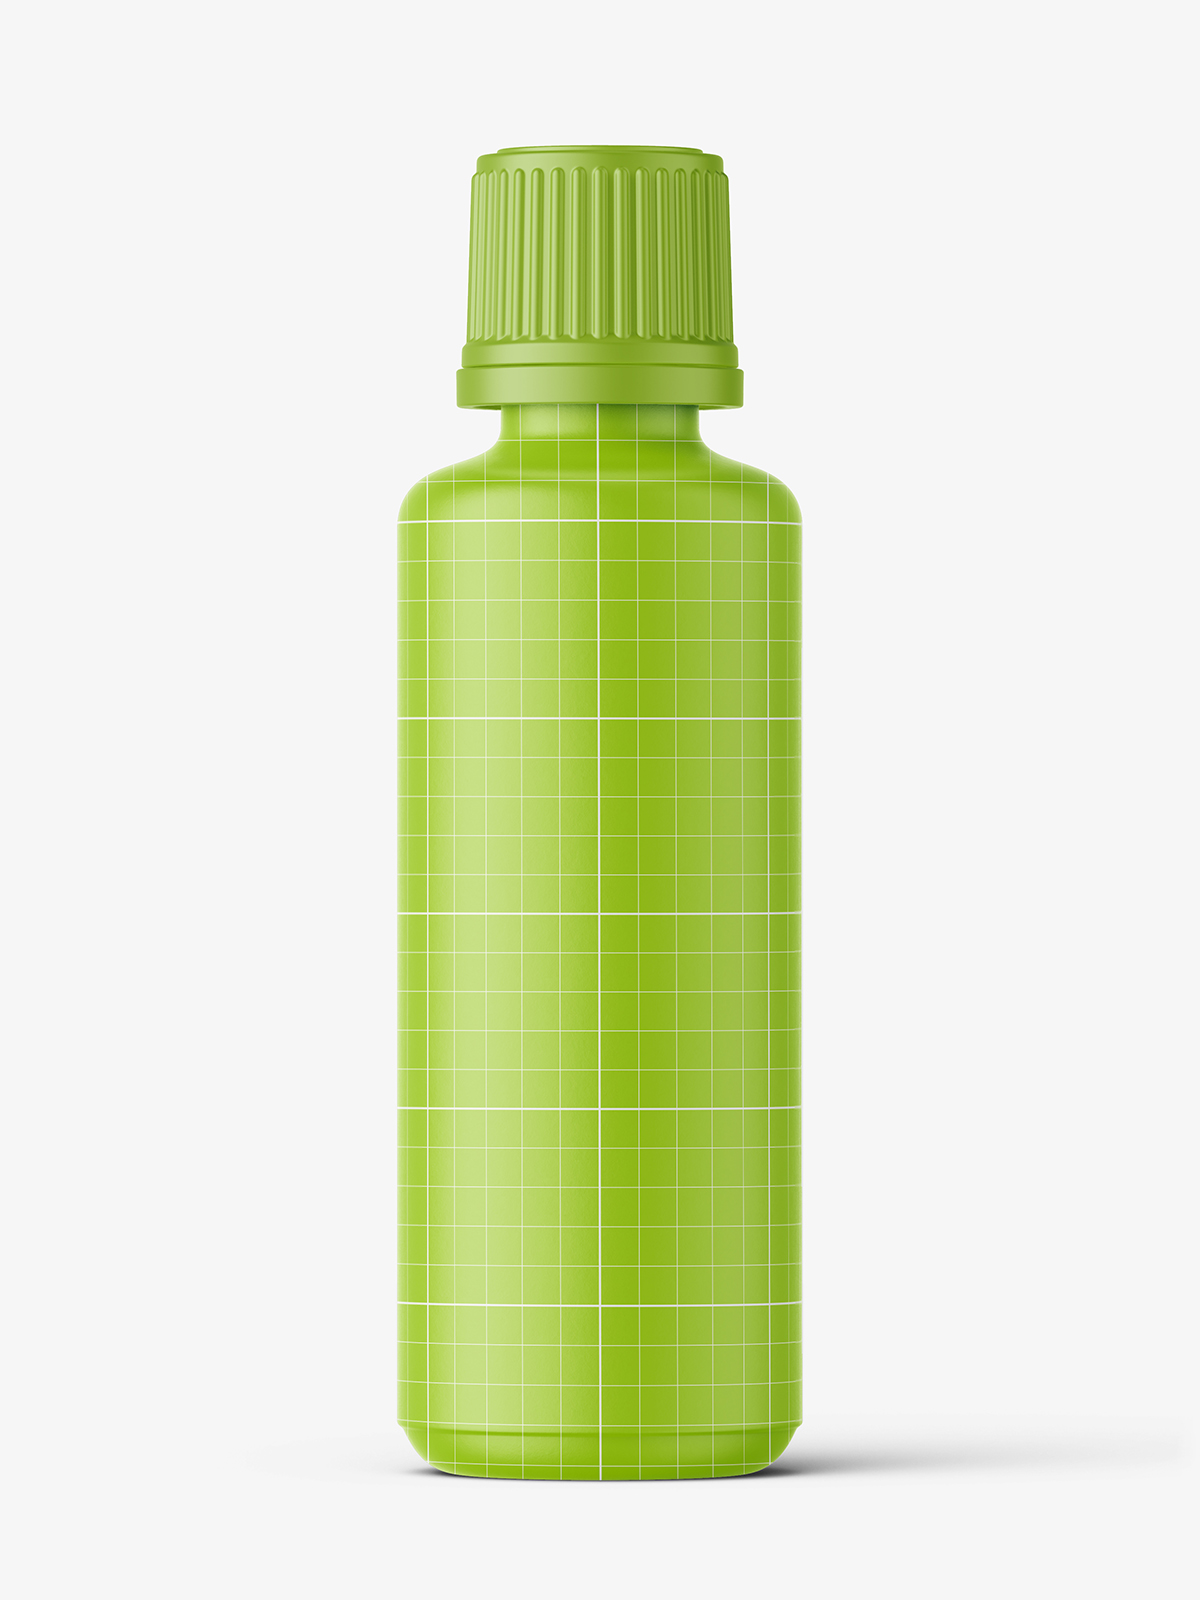 Download Clear bottle with pills mockup / 50 ml - Smarty Mockups